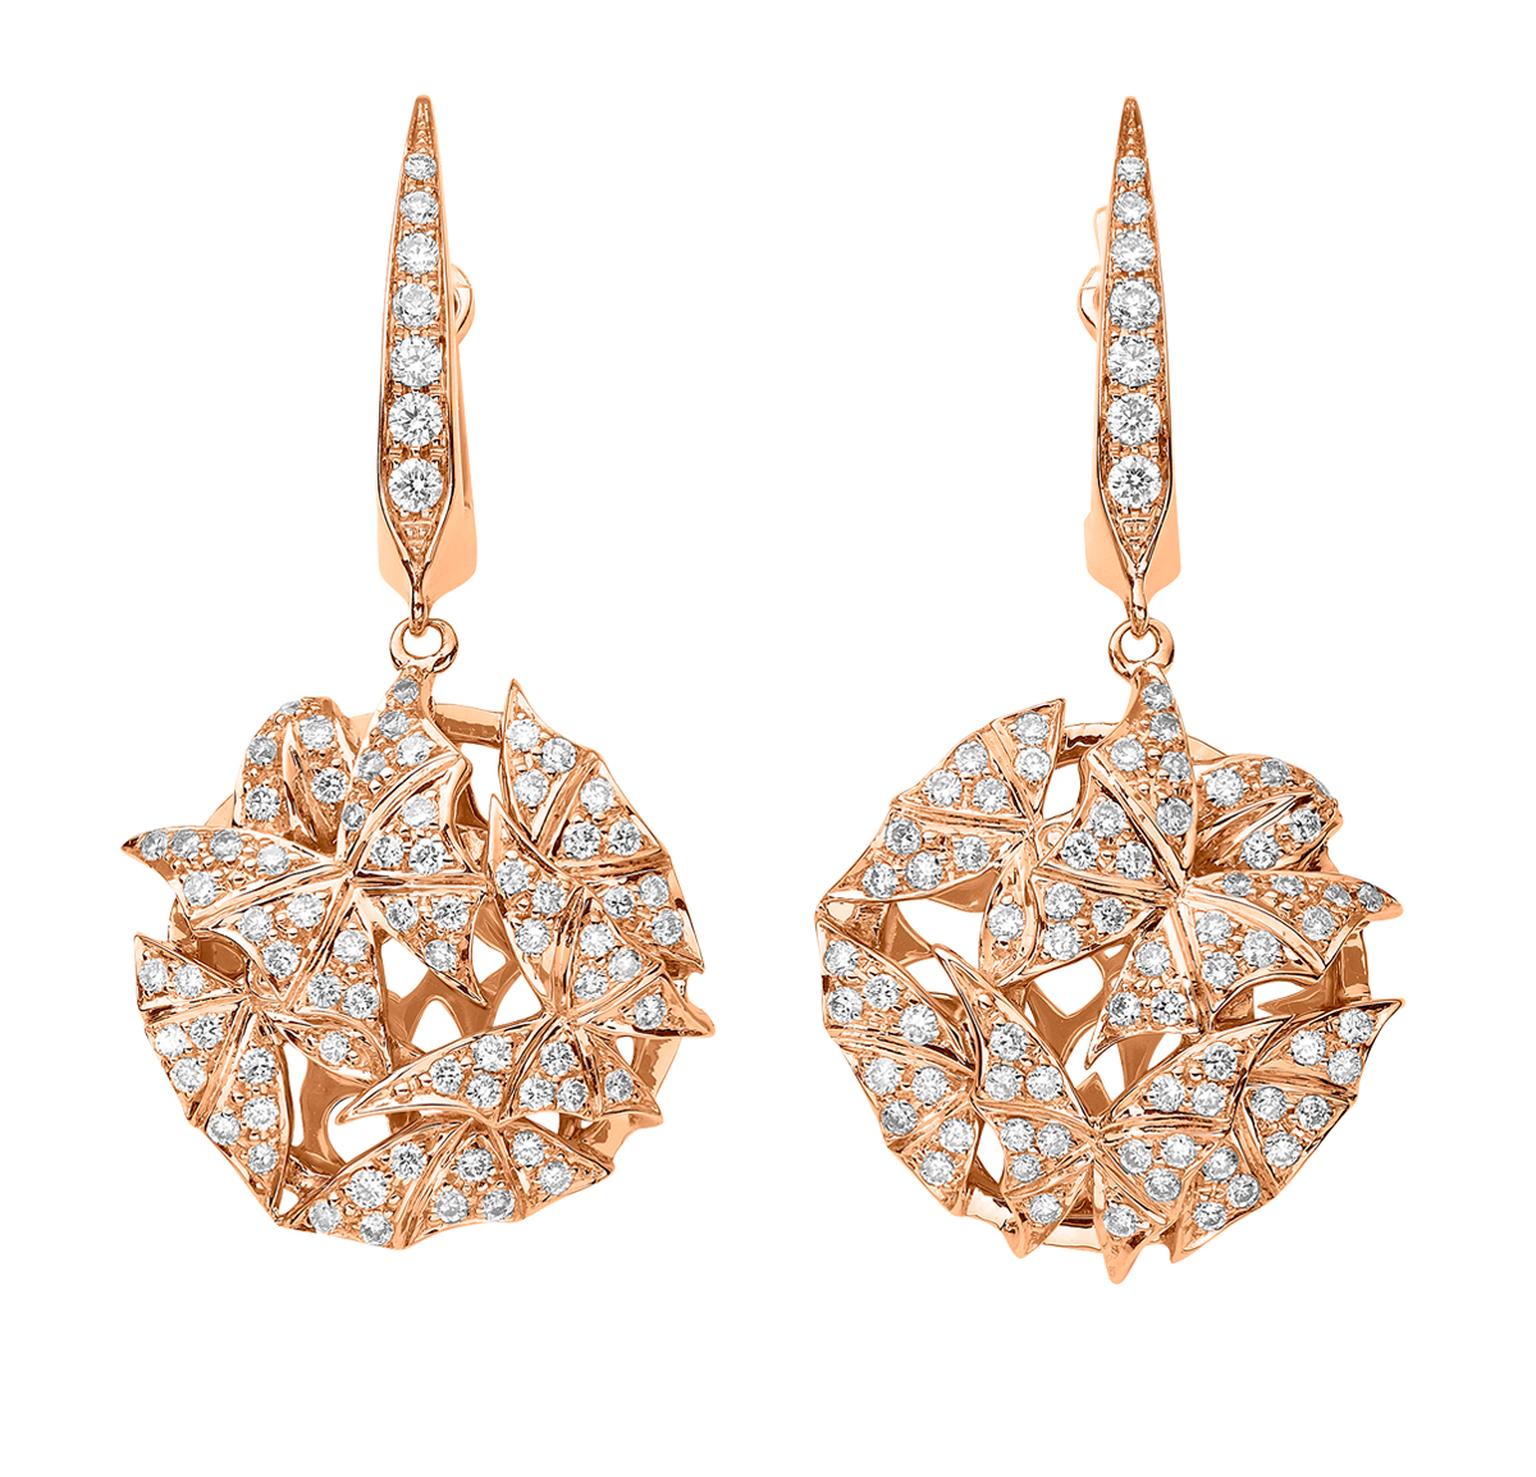 Stephen Webster Fly by Night Mothball earrings in rose gold and diamonds_20131220_Zoom